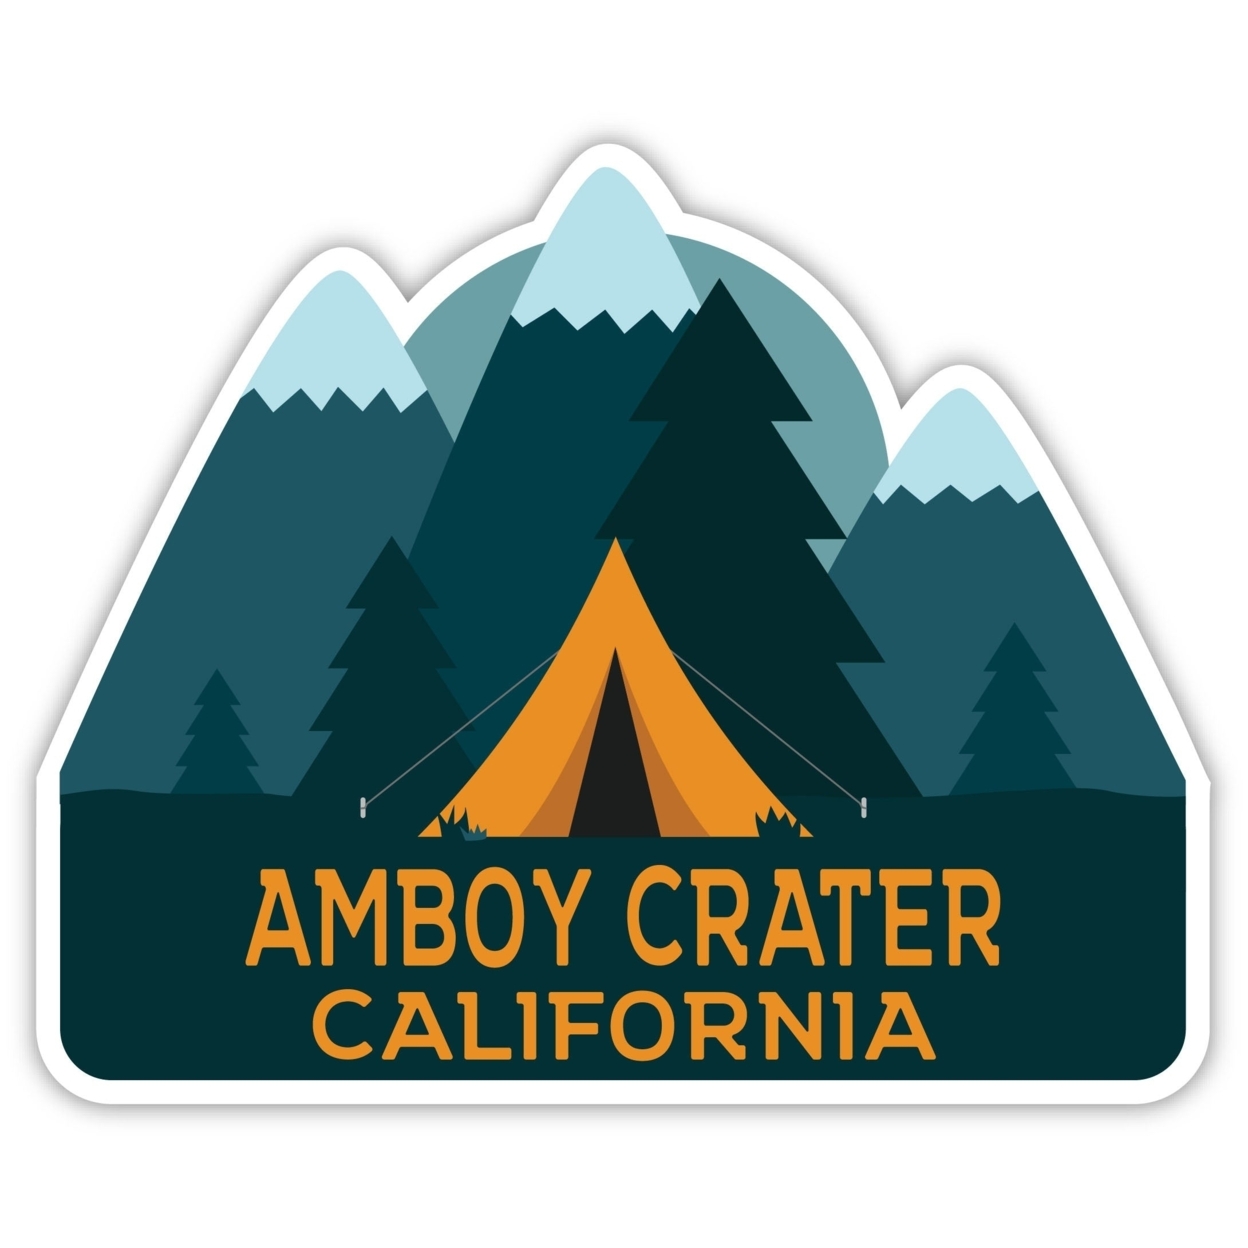 Amboy Crater California Souvenir Decorative Stickers (Choose Theme And Size) - 4-Pack, 8-Inch, Tent